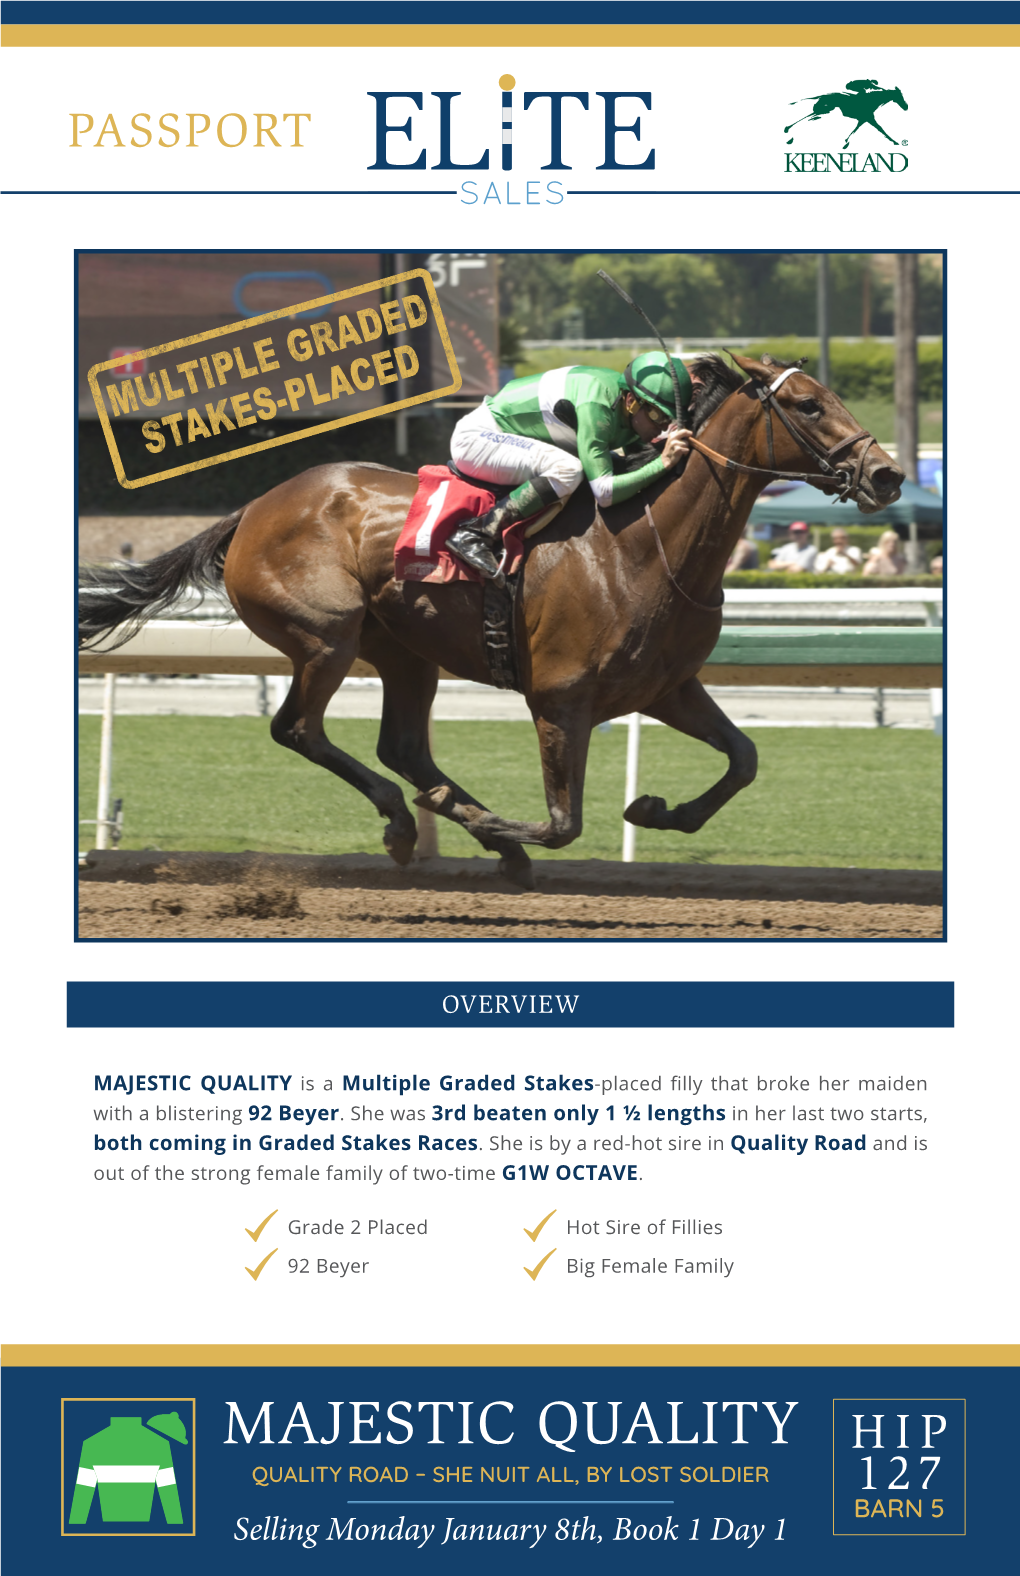 MAJESTIC QUALITY Is a Multiple Graded Stakes-Placed Filly That Broke Her Maiden with a Blistering 92 Beyer